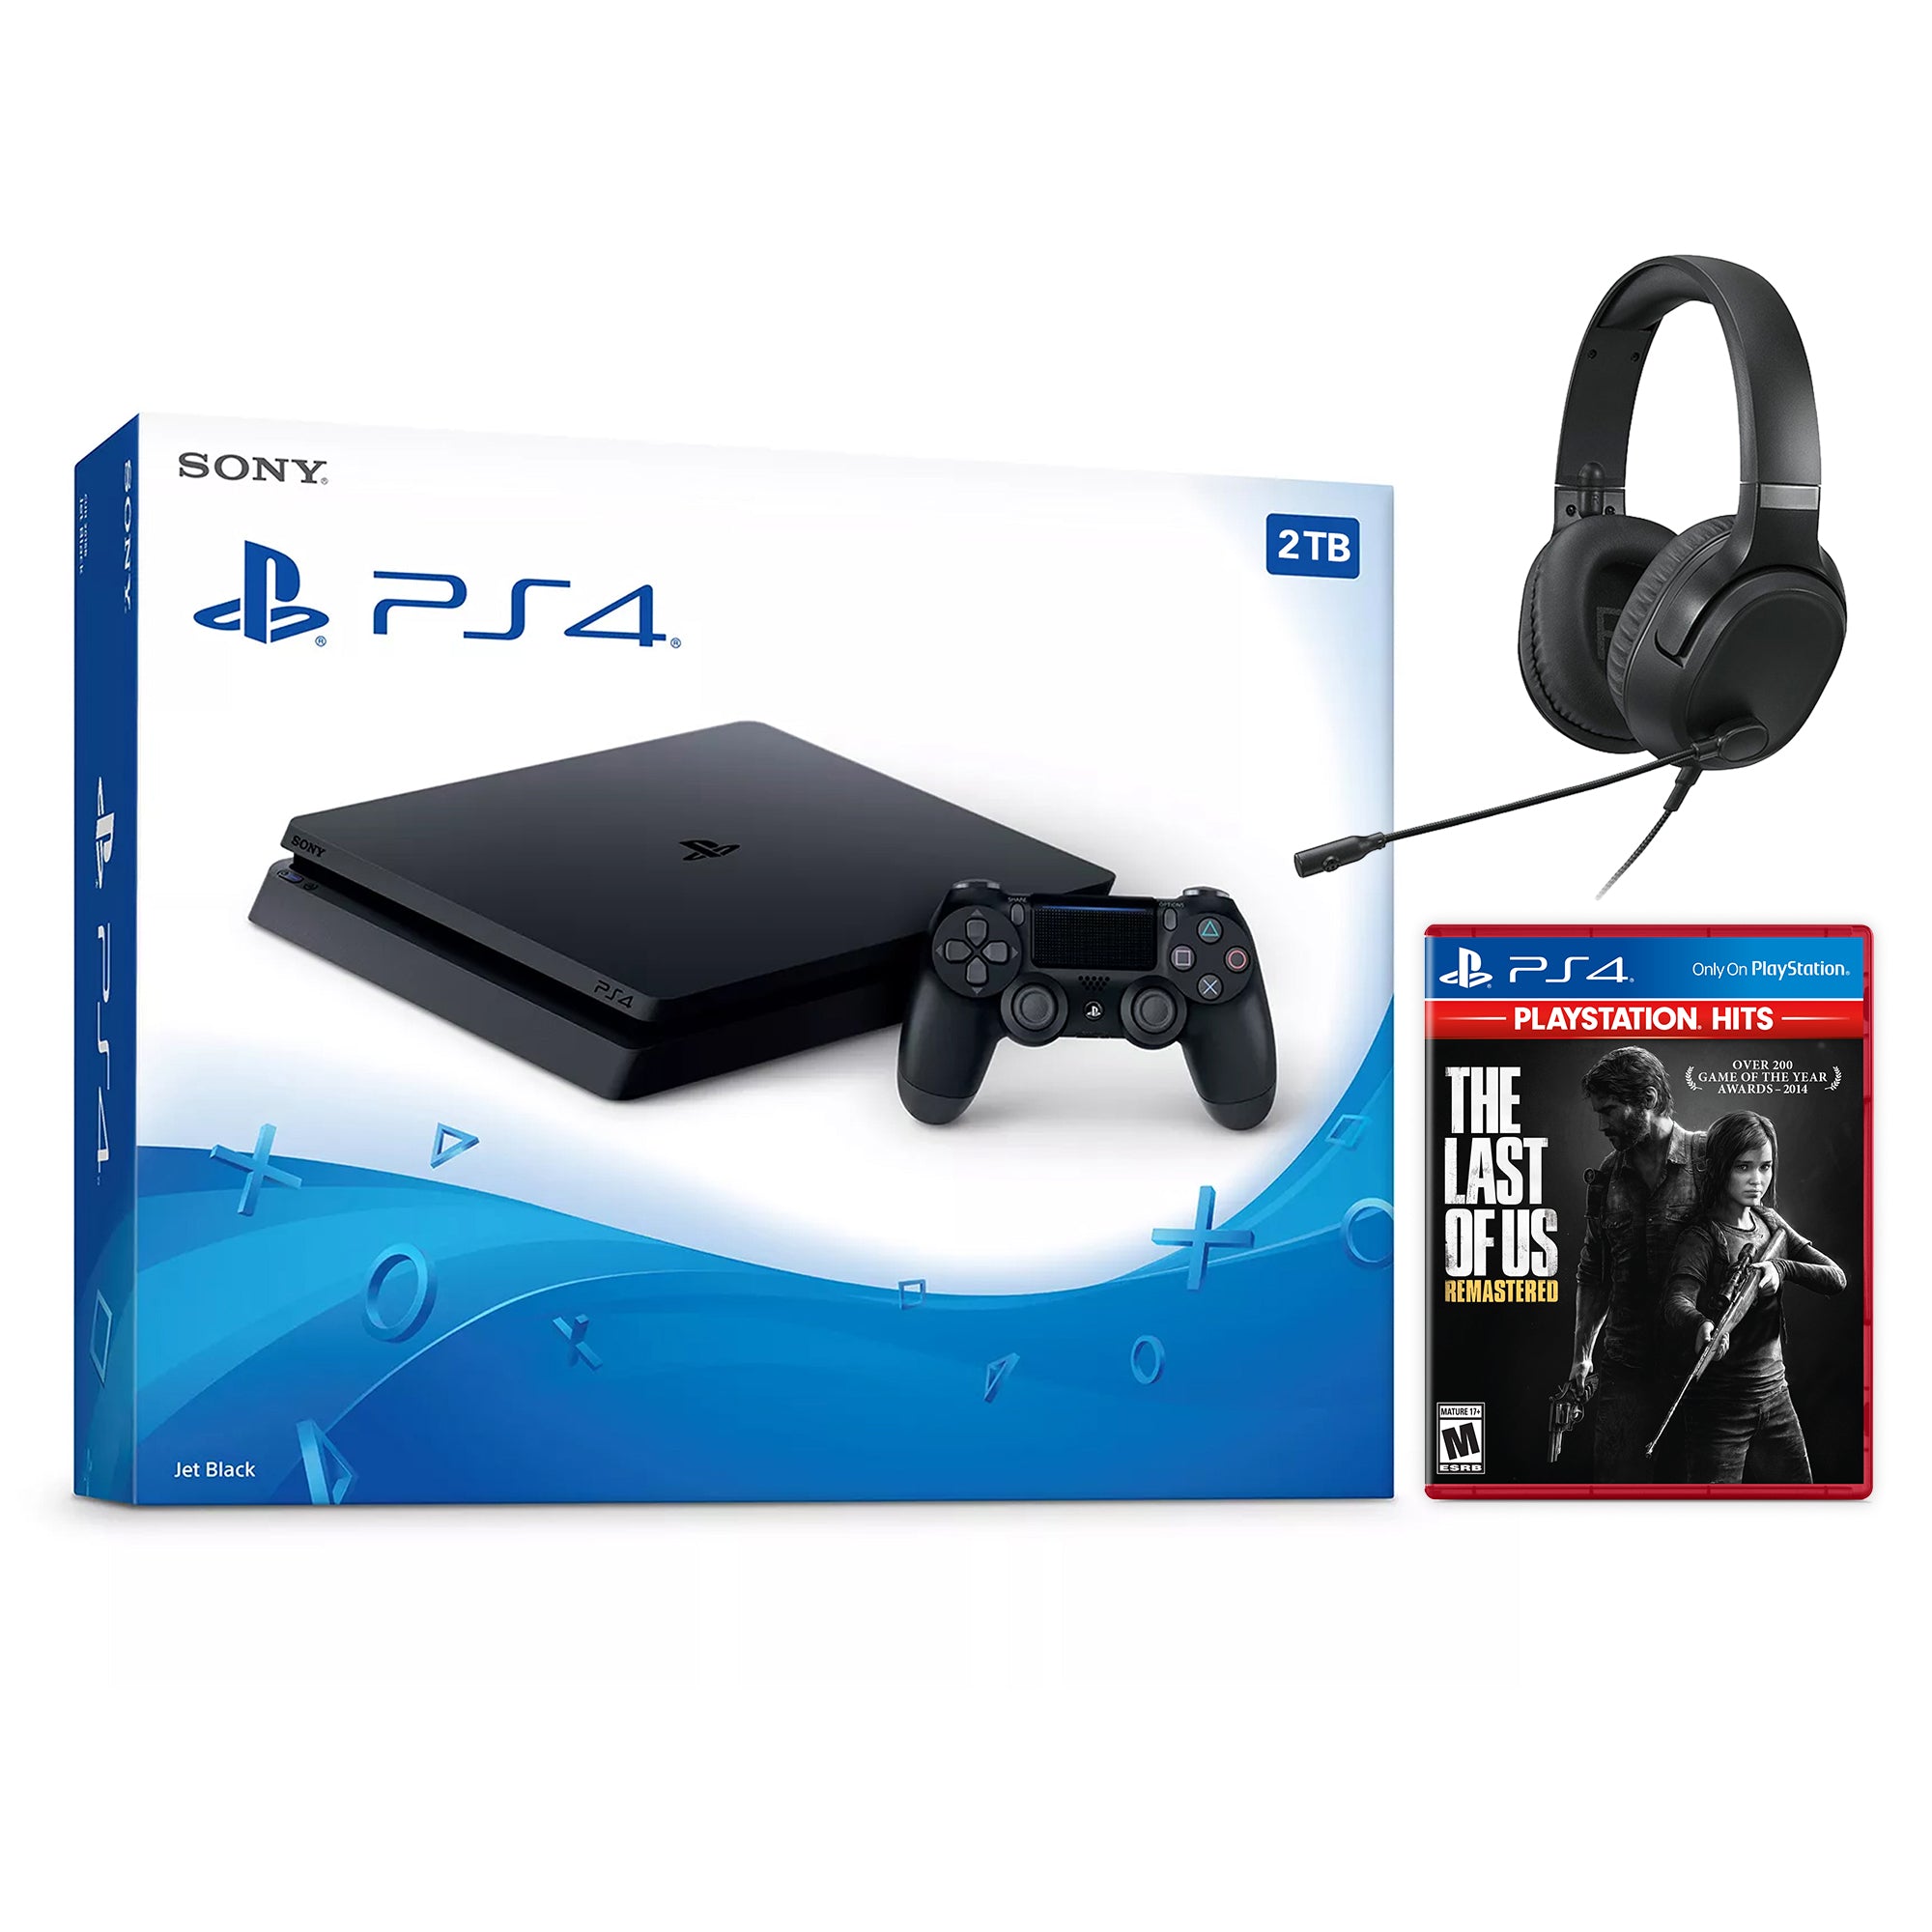 Sony PlayStation 4 Slim Call of Duty Modern Warfare II Bundle Upgrade 2TB HDD PS4 Gaming Console, Jet Black, with Mytrix Chat Headset - Large Capacity Internal Hard Drive Enhanced PS4 Console